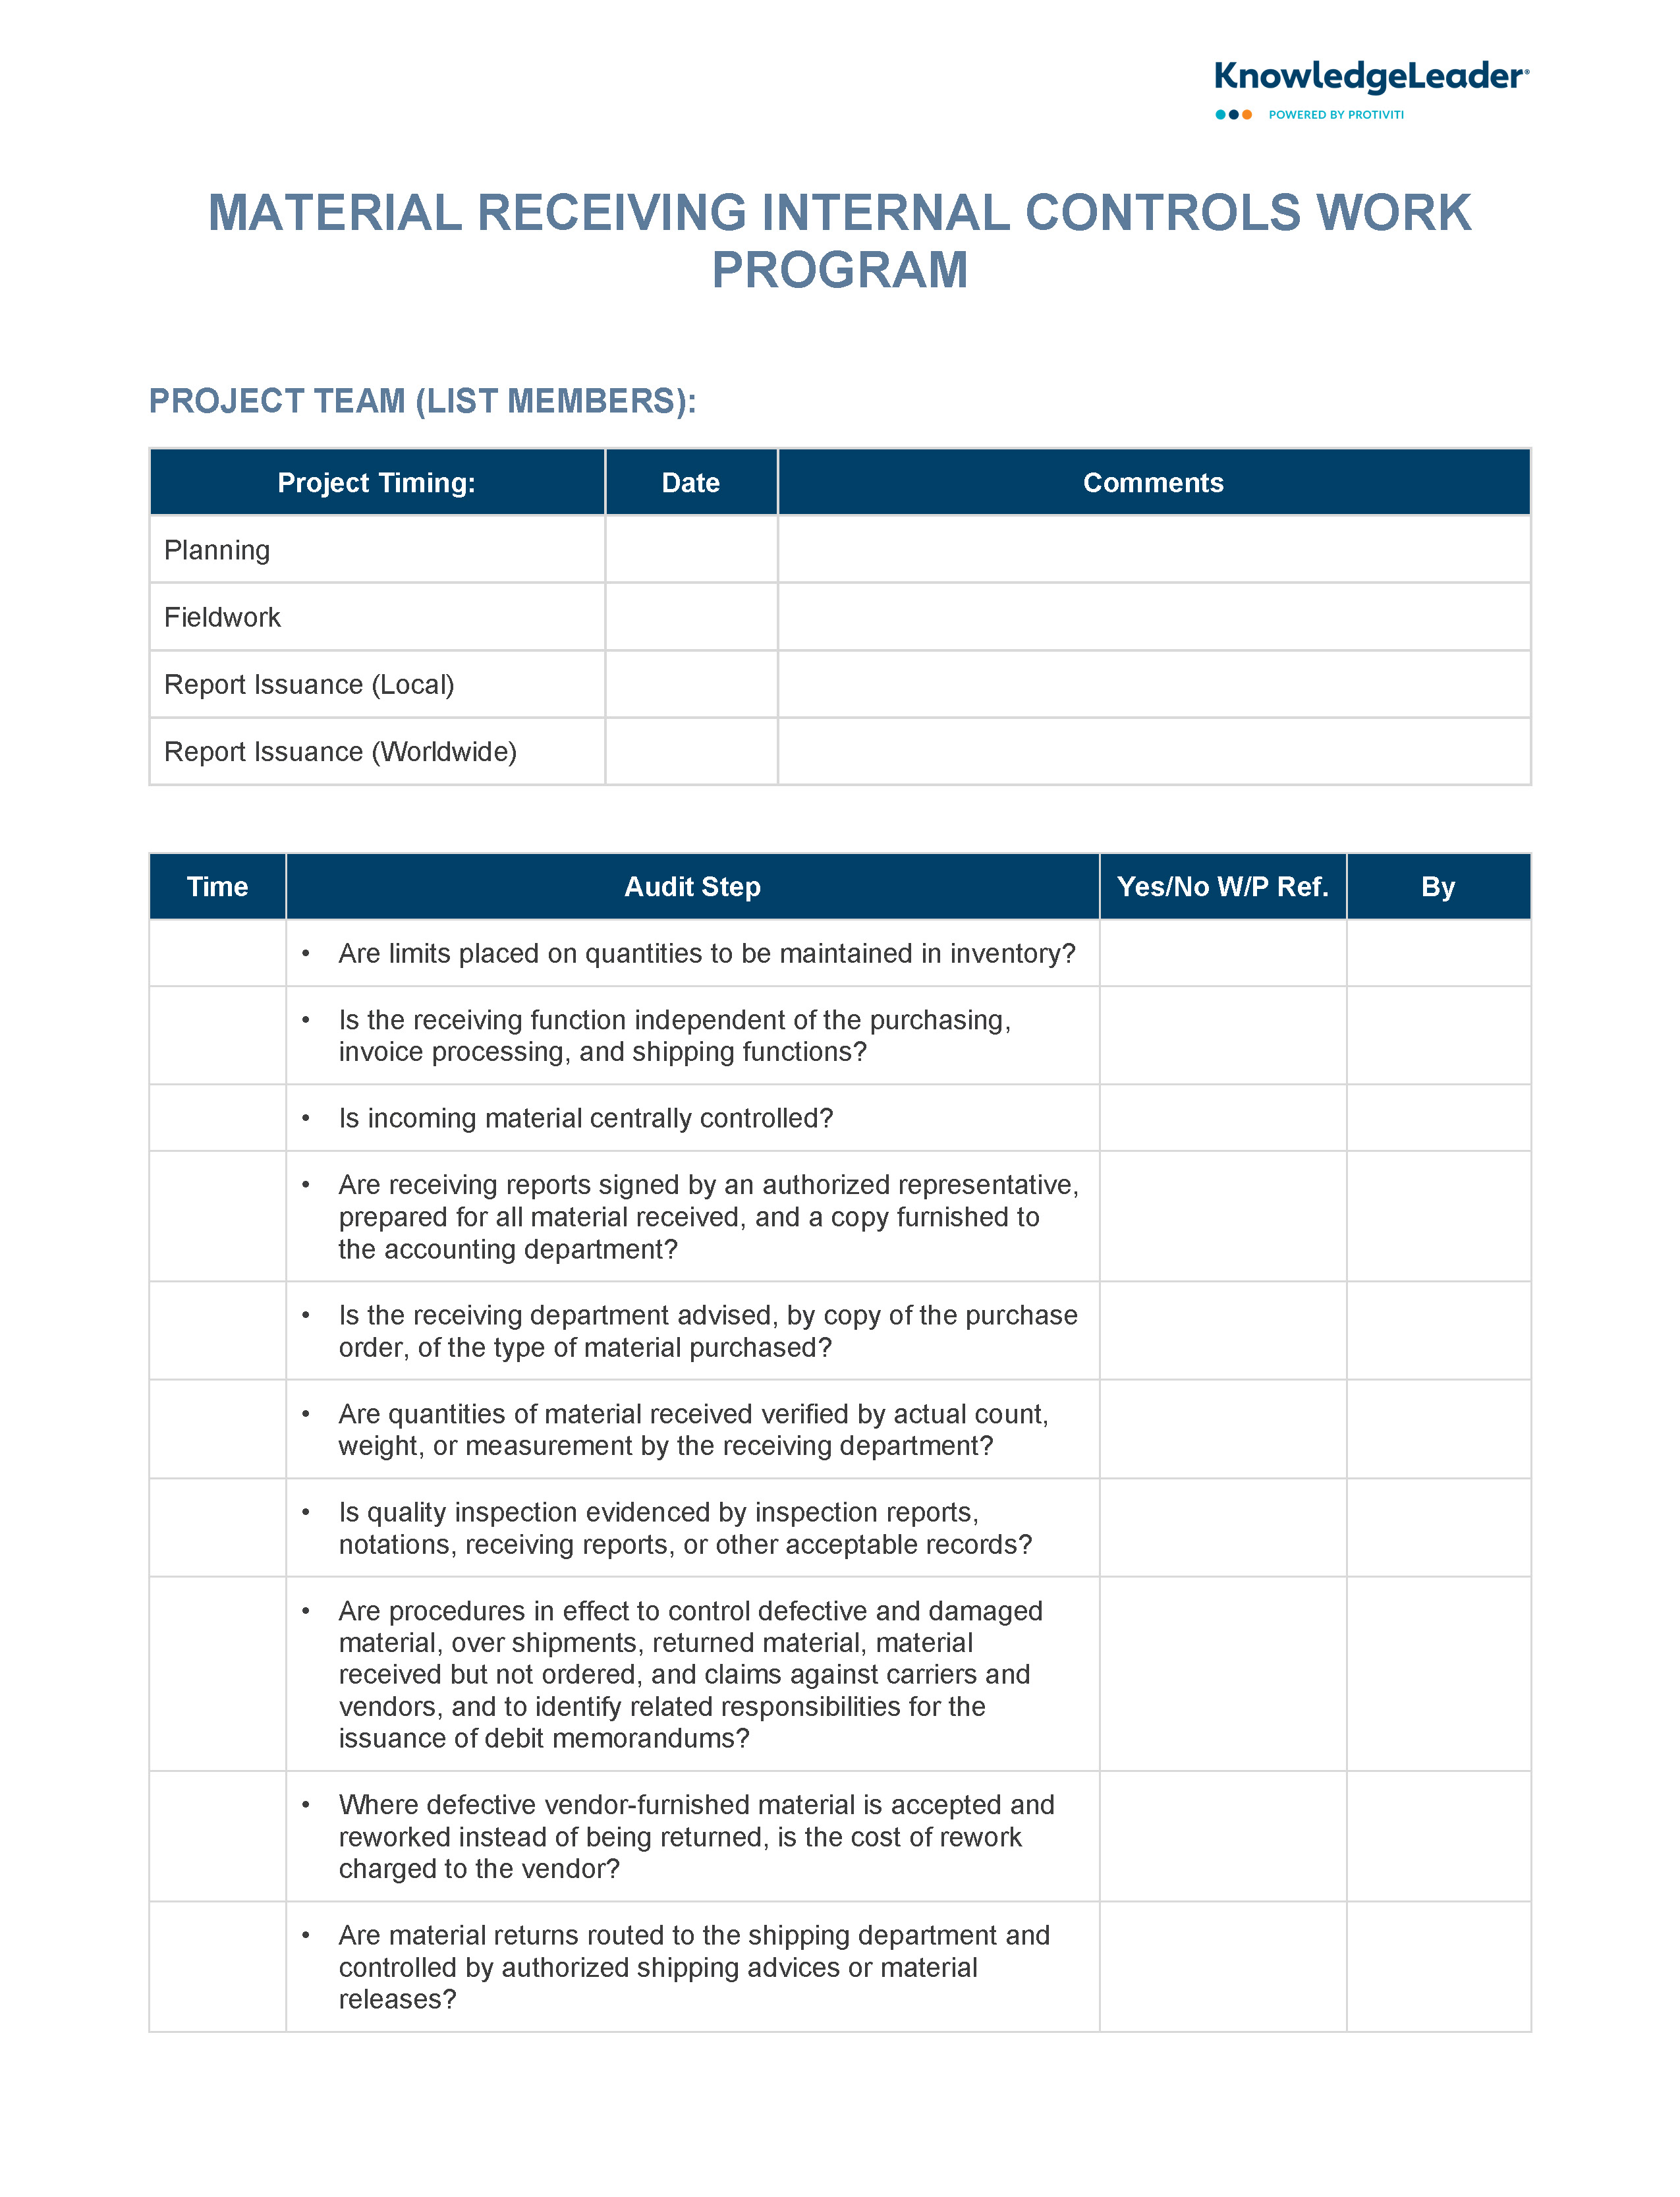 screenshot of the first page of Material Receiving Internal Controls Audit Work Program